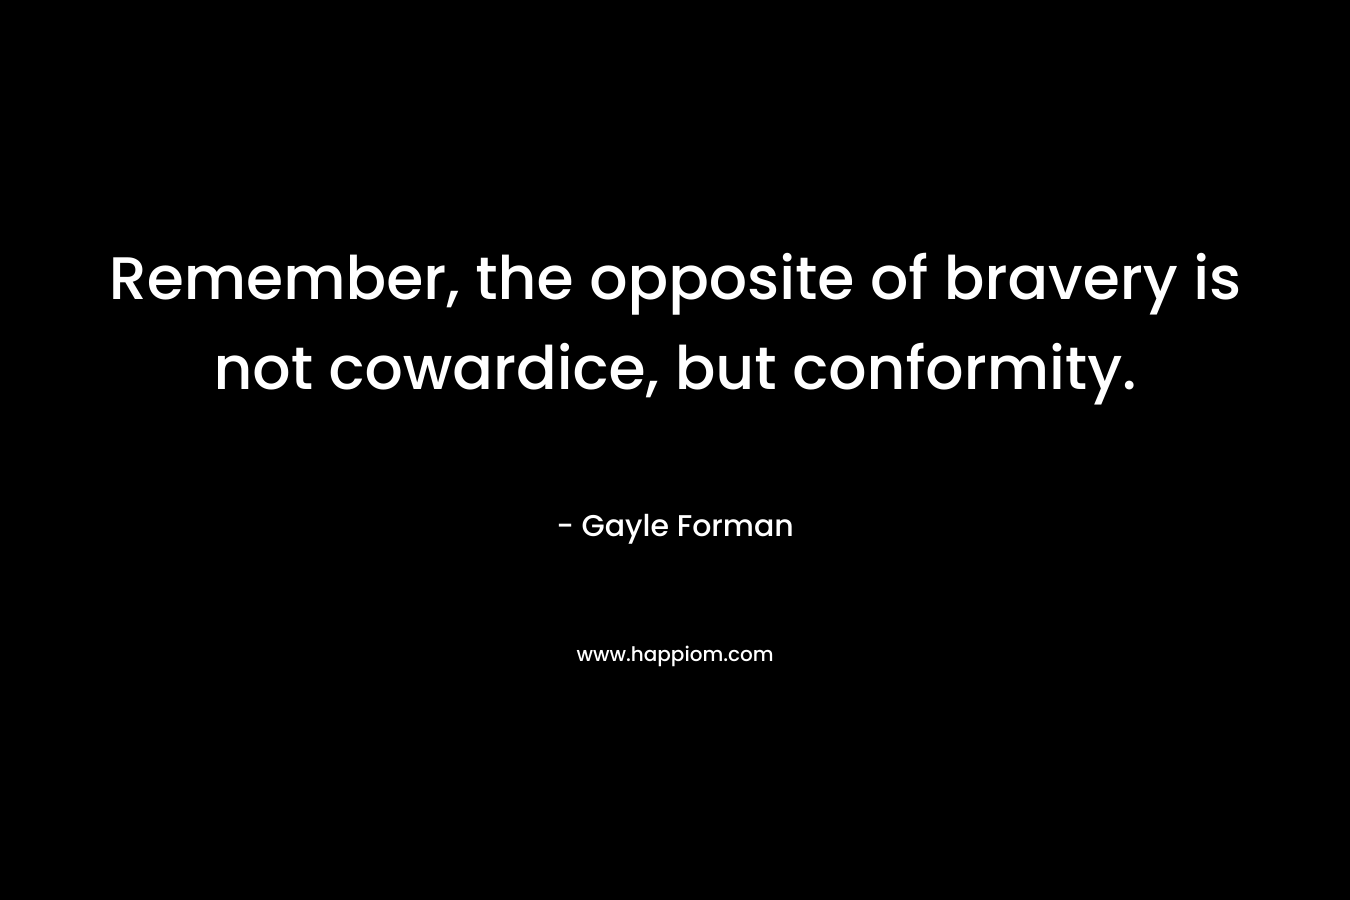 Remember, the opposite of bravery is not cowardice, but conformity.